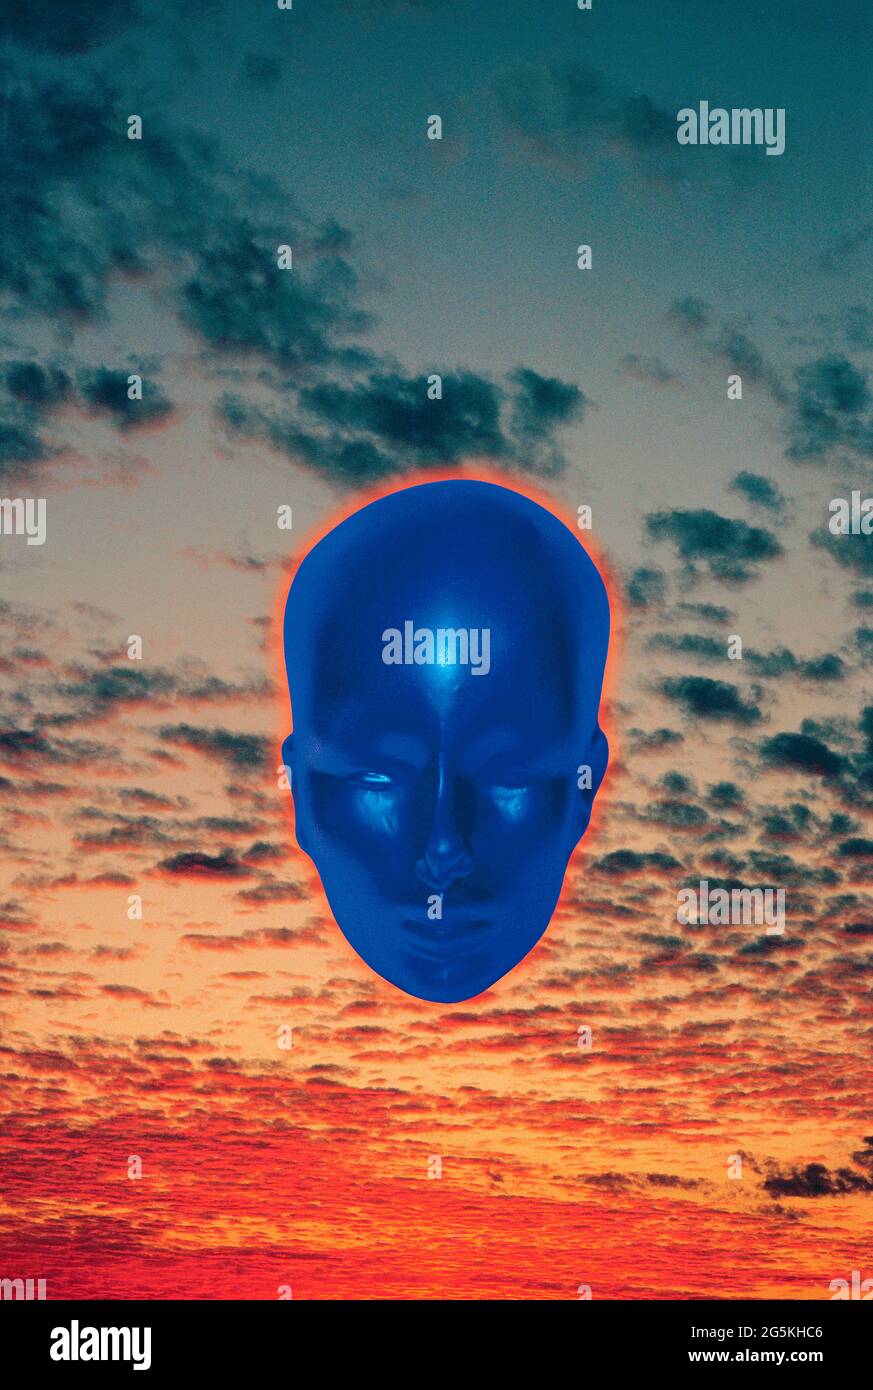 Concept. Blue head floating mid-air in sunset sky. Stock Photo